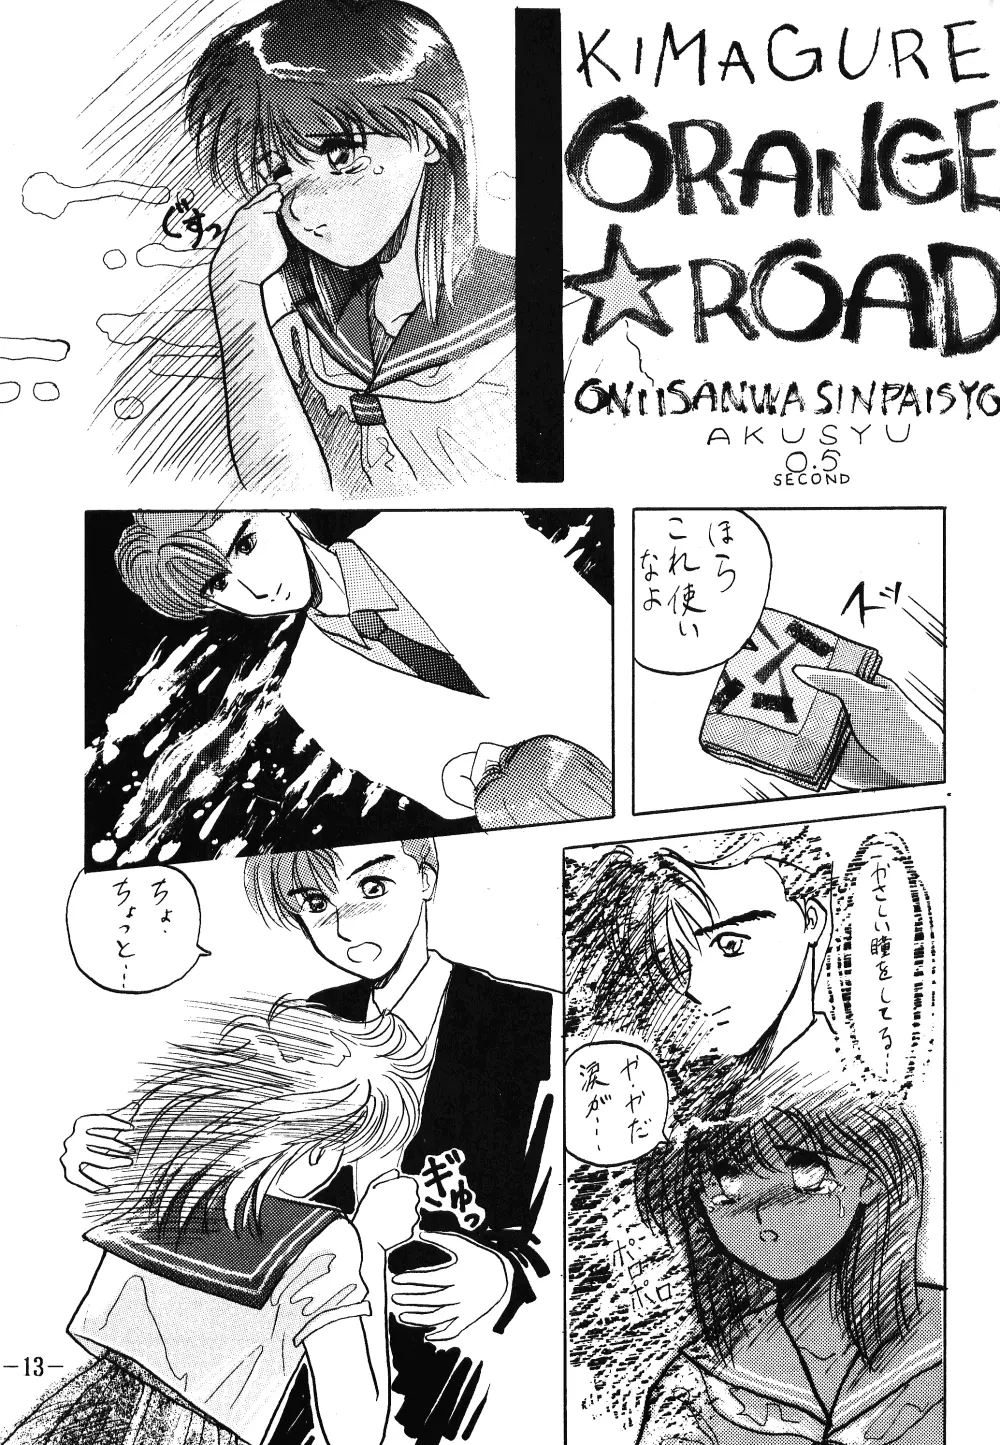 Fro2 Fight Vol. 1 Page.13